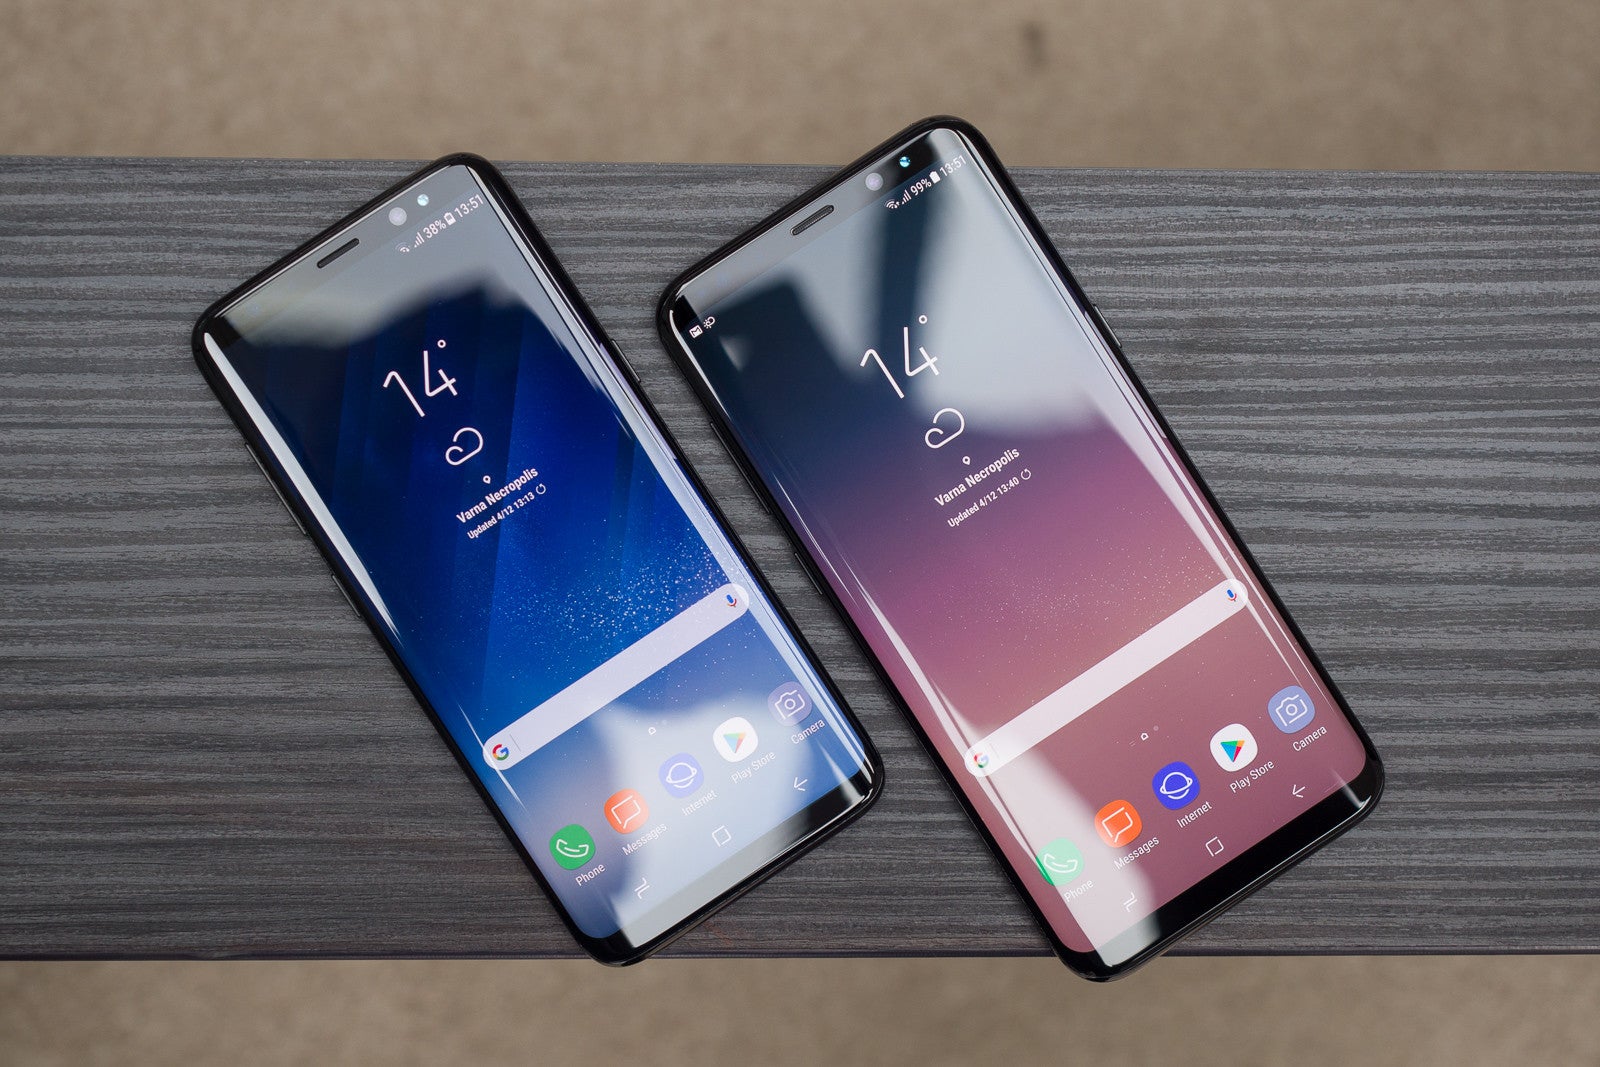 Deal: Unlocked Samsung Galaxy S8 and S8+ on sale for the lowest price to date